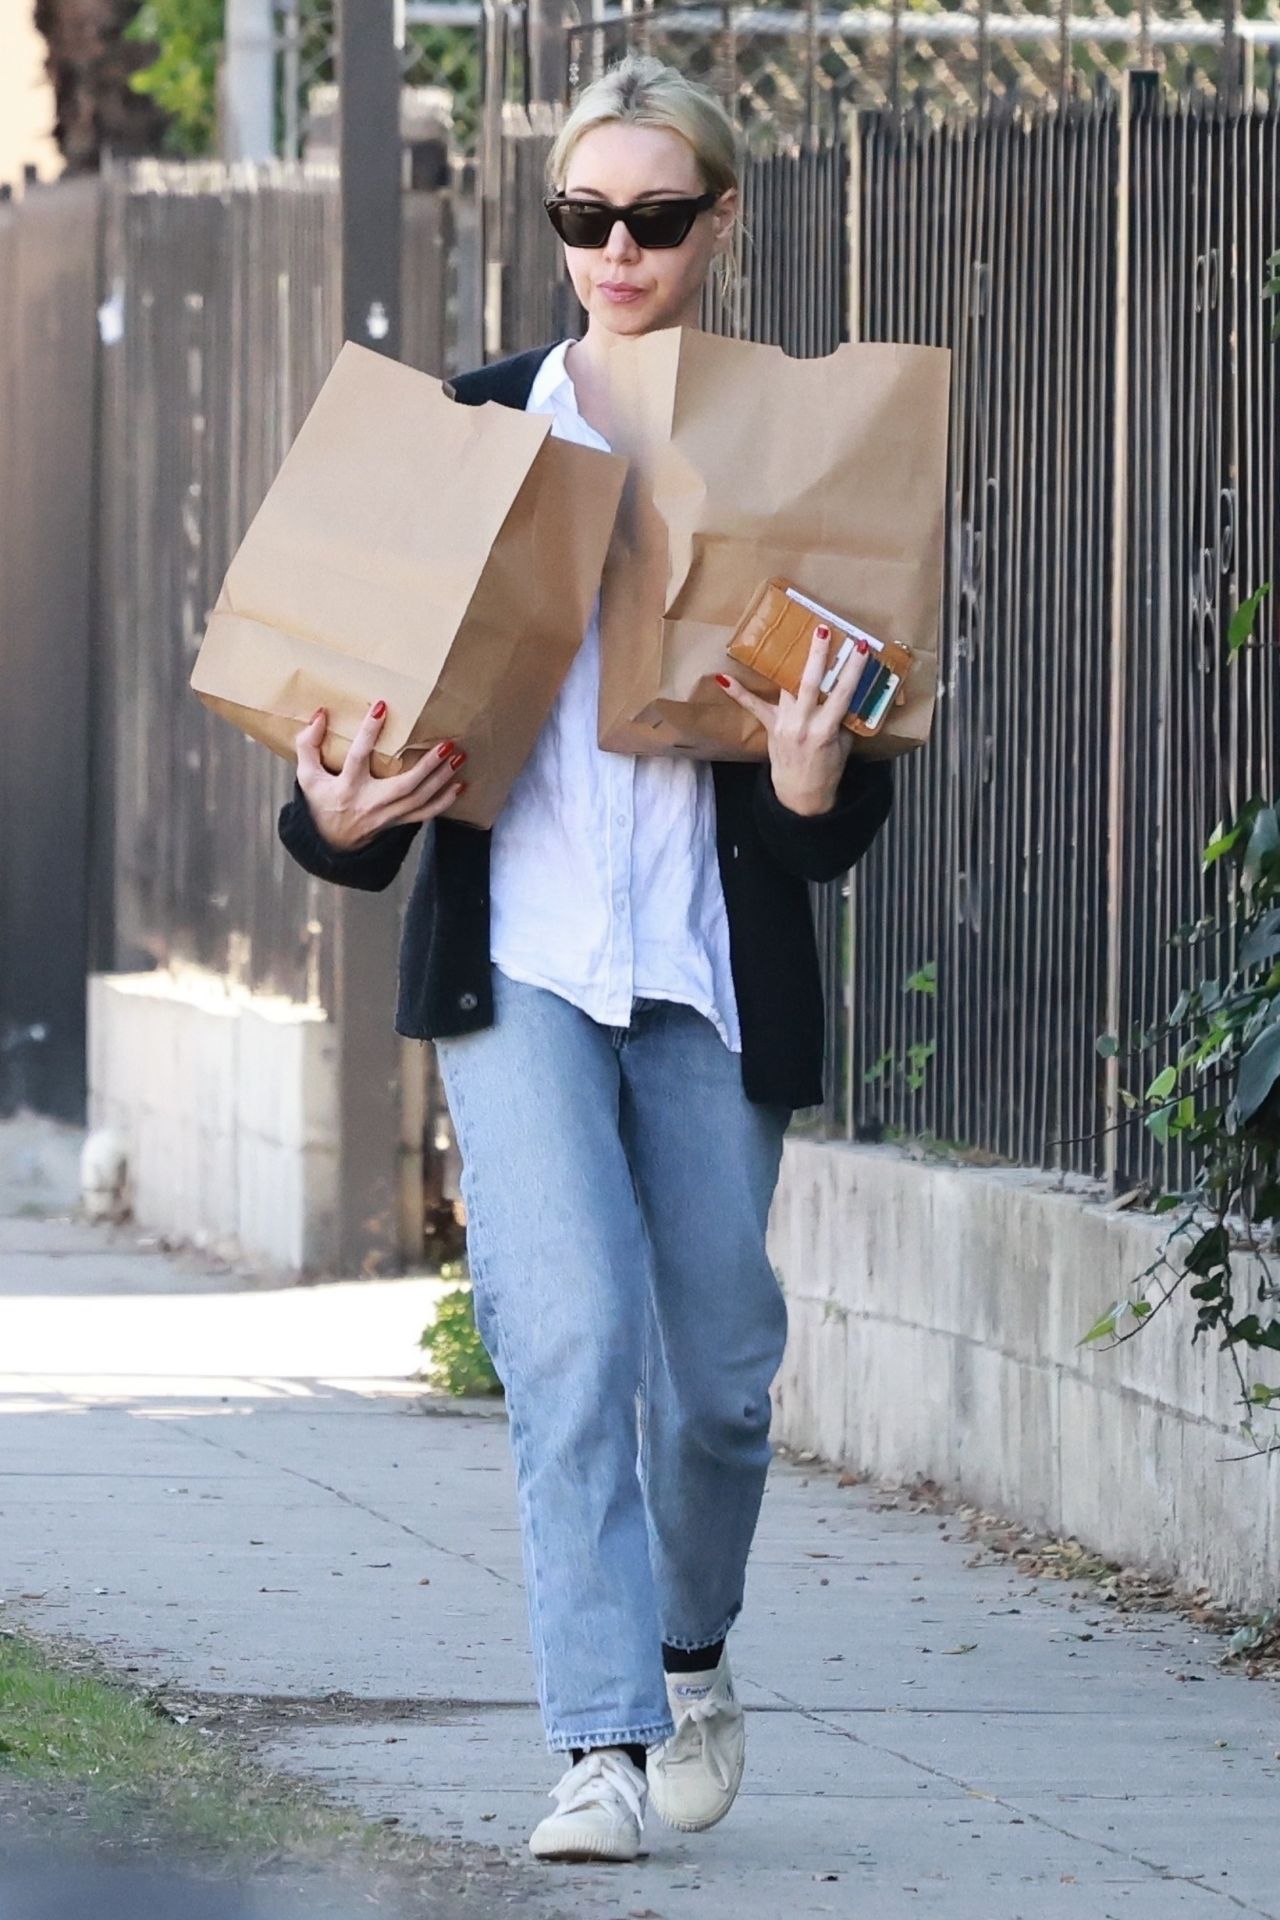 Aubrey Plaza - Stopping by Courage Bagels in LA 11/27/2022 • CelebMafia